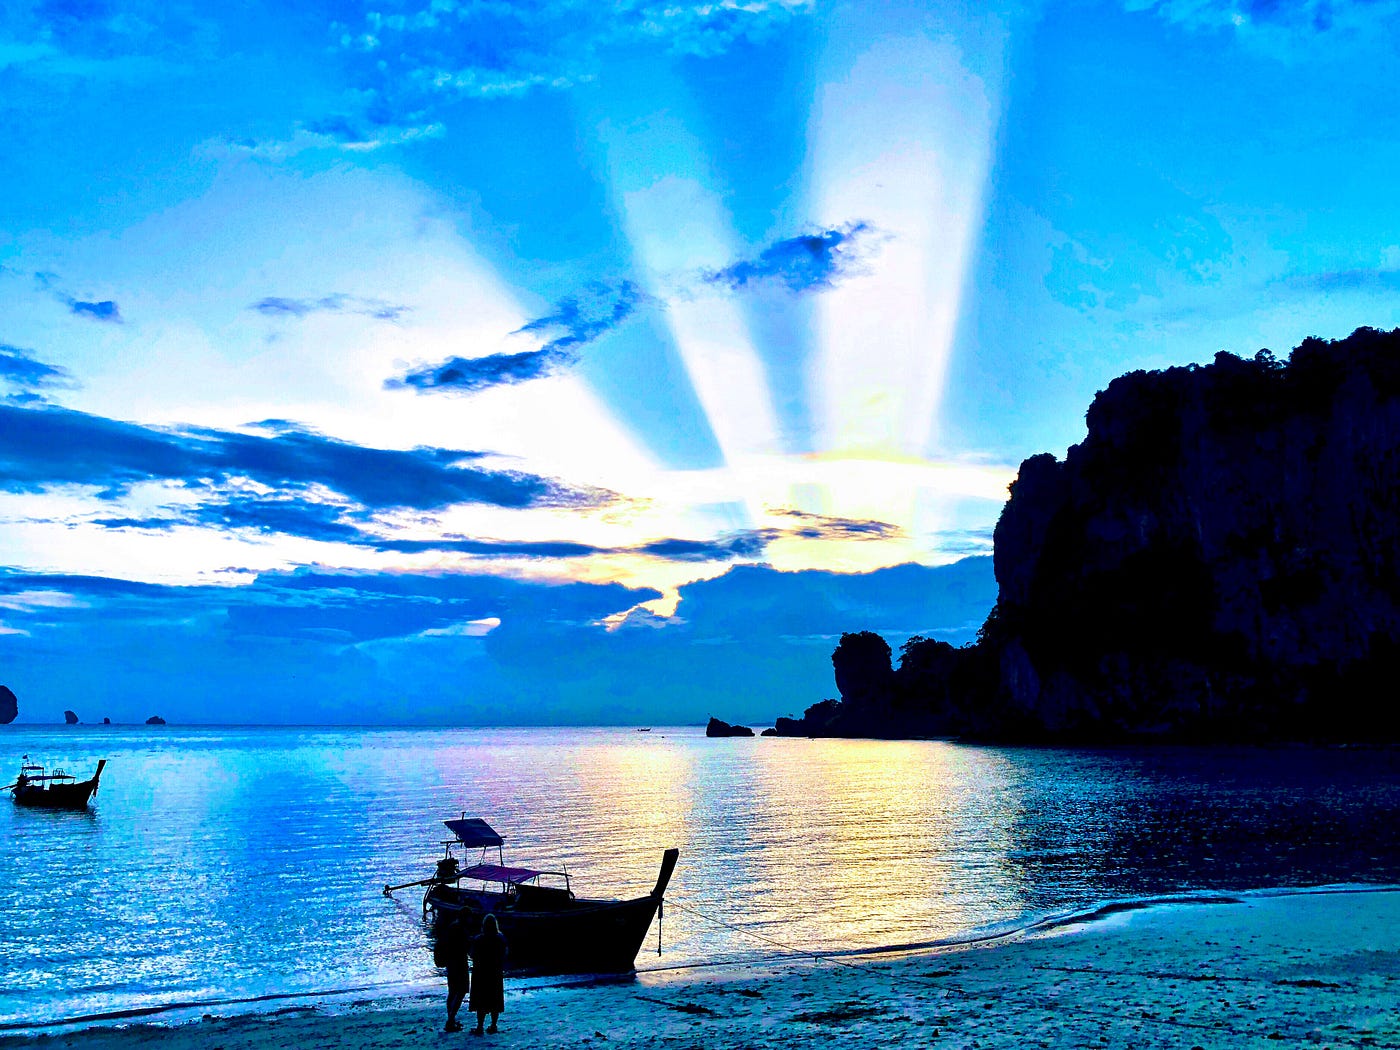 Two Adventures You Don't Want To Miss At Railay Beach